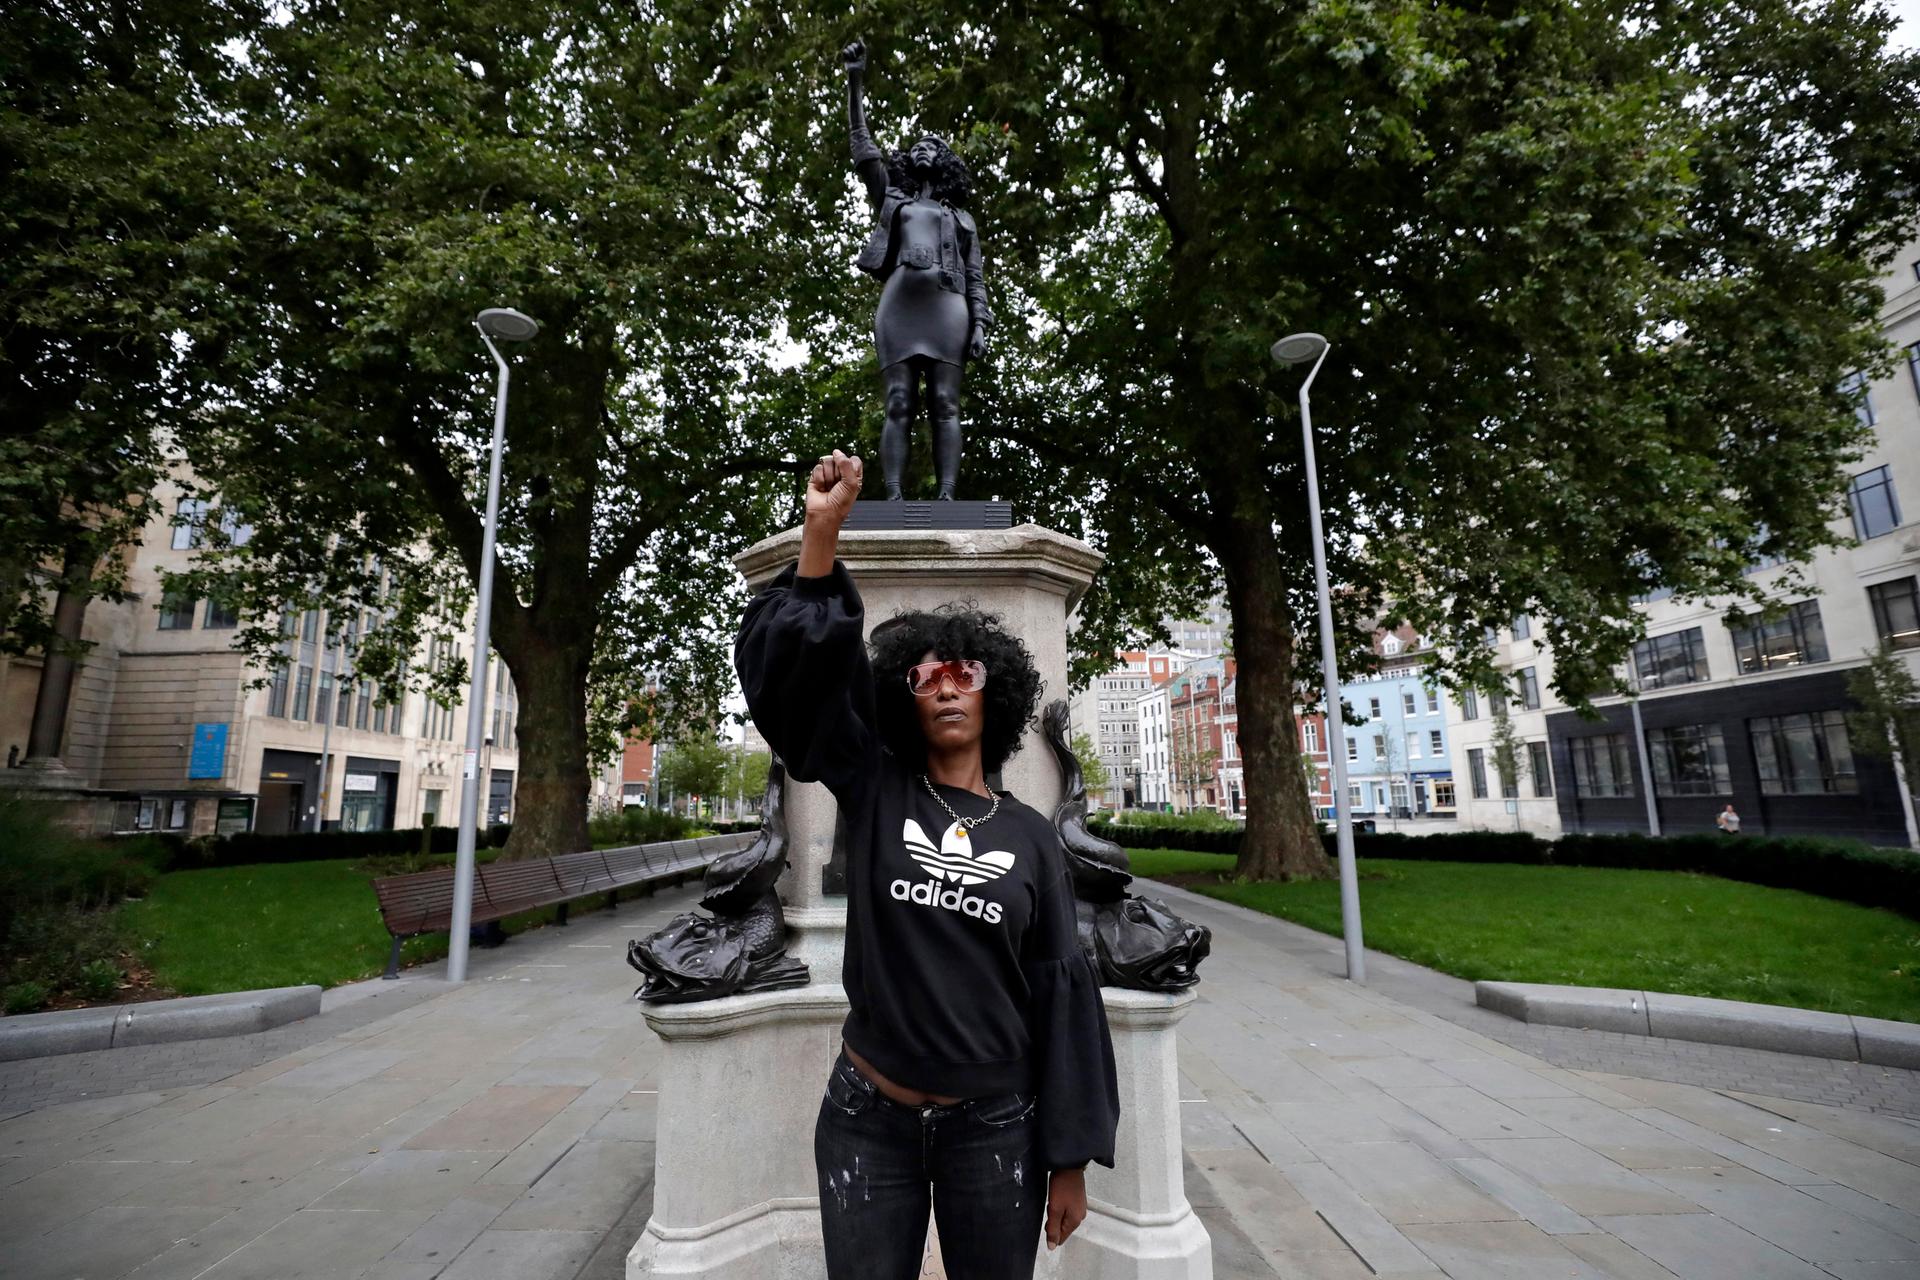 Jen Reid poses for photographs in front of the new black resin and steel statue portraying her, entitled "A Surge of Power (Jen Reid) 2020" by artist Marc Quinn after the statue was put up this morning on the empty plinth of the toppled statue of 17th century slave trader Edward Colston, which was pulled down during a Black Lives Matter protest in Bristol, England, Wednesday, July 15, 2020. On June 7 anti-racism demonstrators pulled the 18-foot (5.5 meter) bronze likeness of Colston down, dragged it to the nearby harbor and dumped it in the River Avon — sparking both delight and dismay in Britain and beyond. (AP Photo/Matt Dunham)